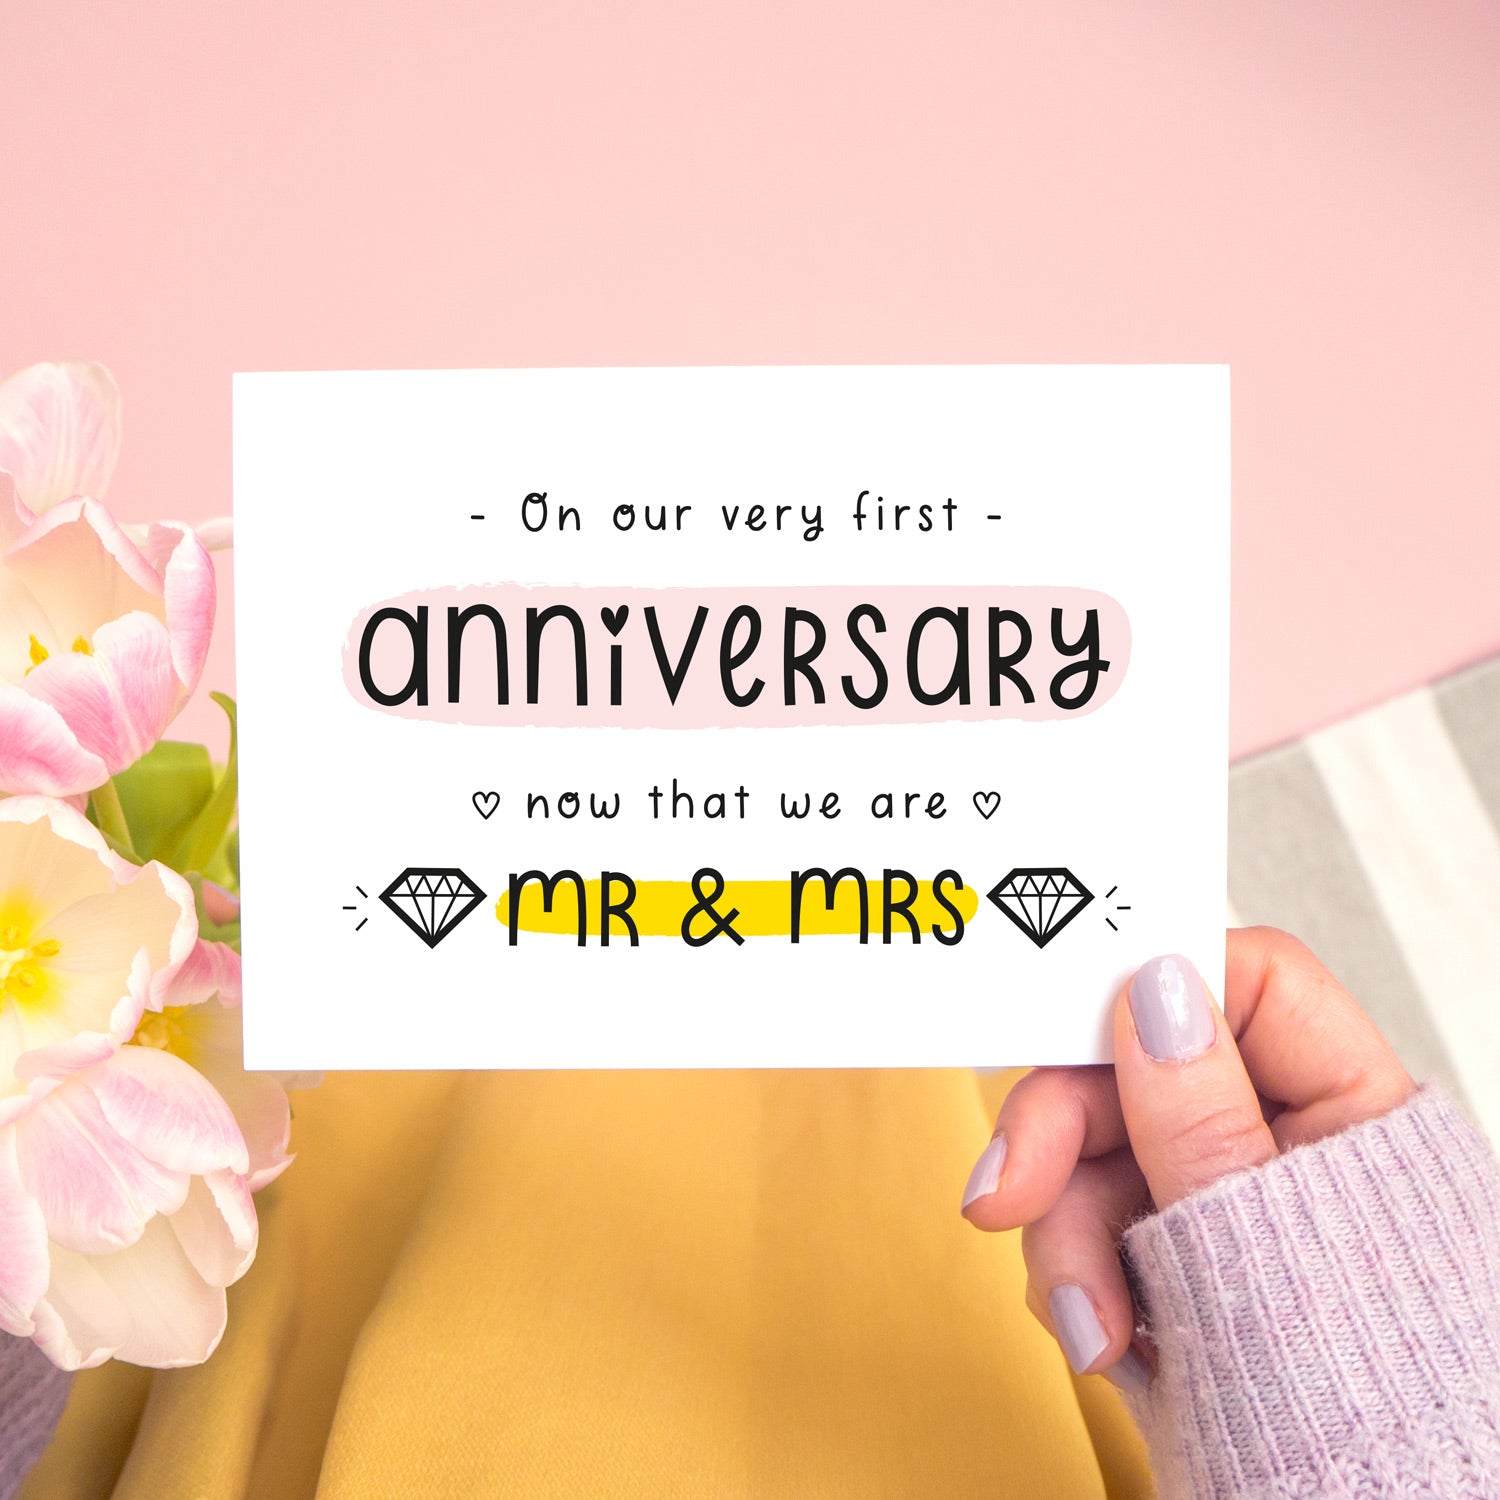 A first anniversary or Valentine’s card photographed on a pink background with pink tulip flowers, a grey and white stripe rug and yellow fabric. This image shows the first anniversary option with the Mr & Mrs wording. The text is black and there are pops of yellow and pink behind key words.